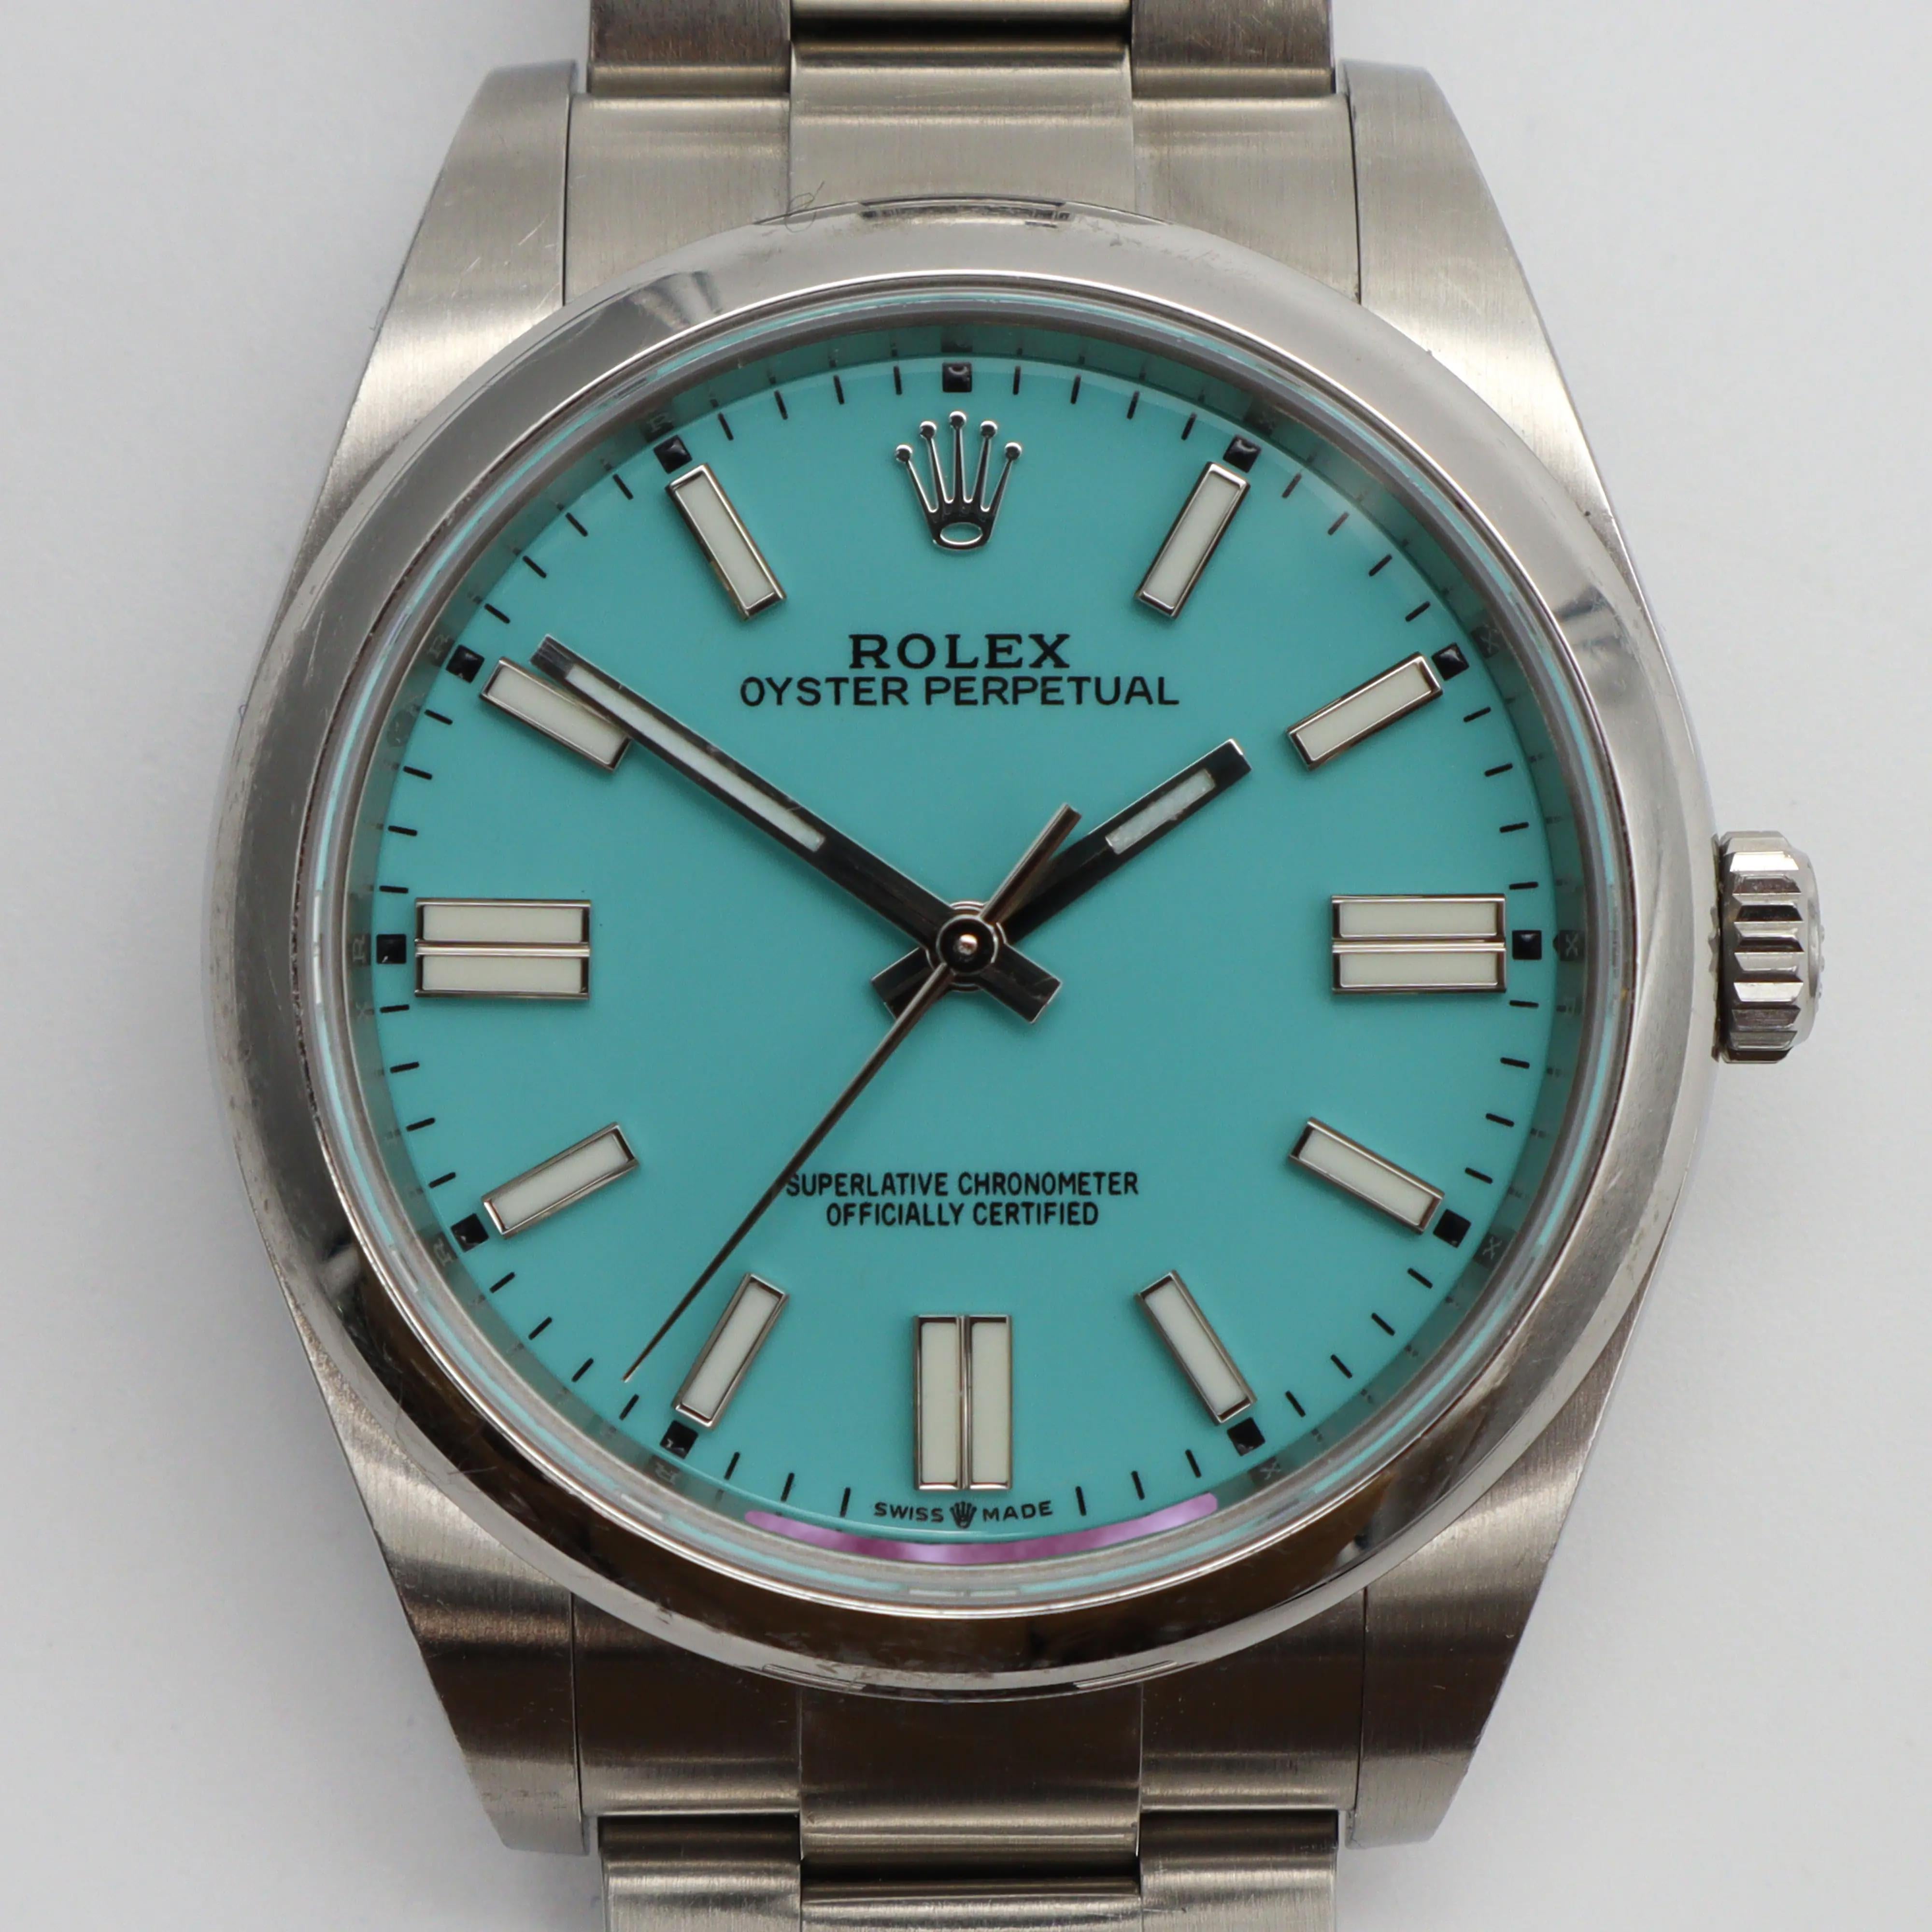 Pre-owned. Comes with an original box and paper. Custom Aftermarket Turquoise Dial


Brand: Rolex  Type: Wristwatch  Department: Men  Model Number: 116000  Country/Region of Manufacture: Switzerland  Style: Luxury  Model: Rolex Oyster Perpetual